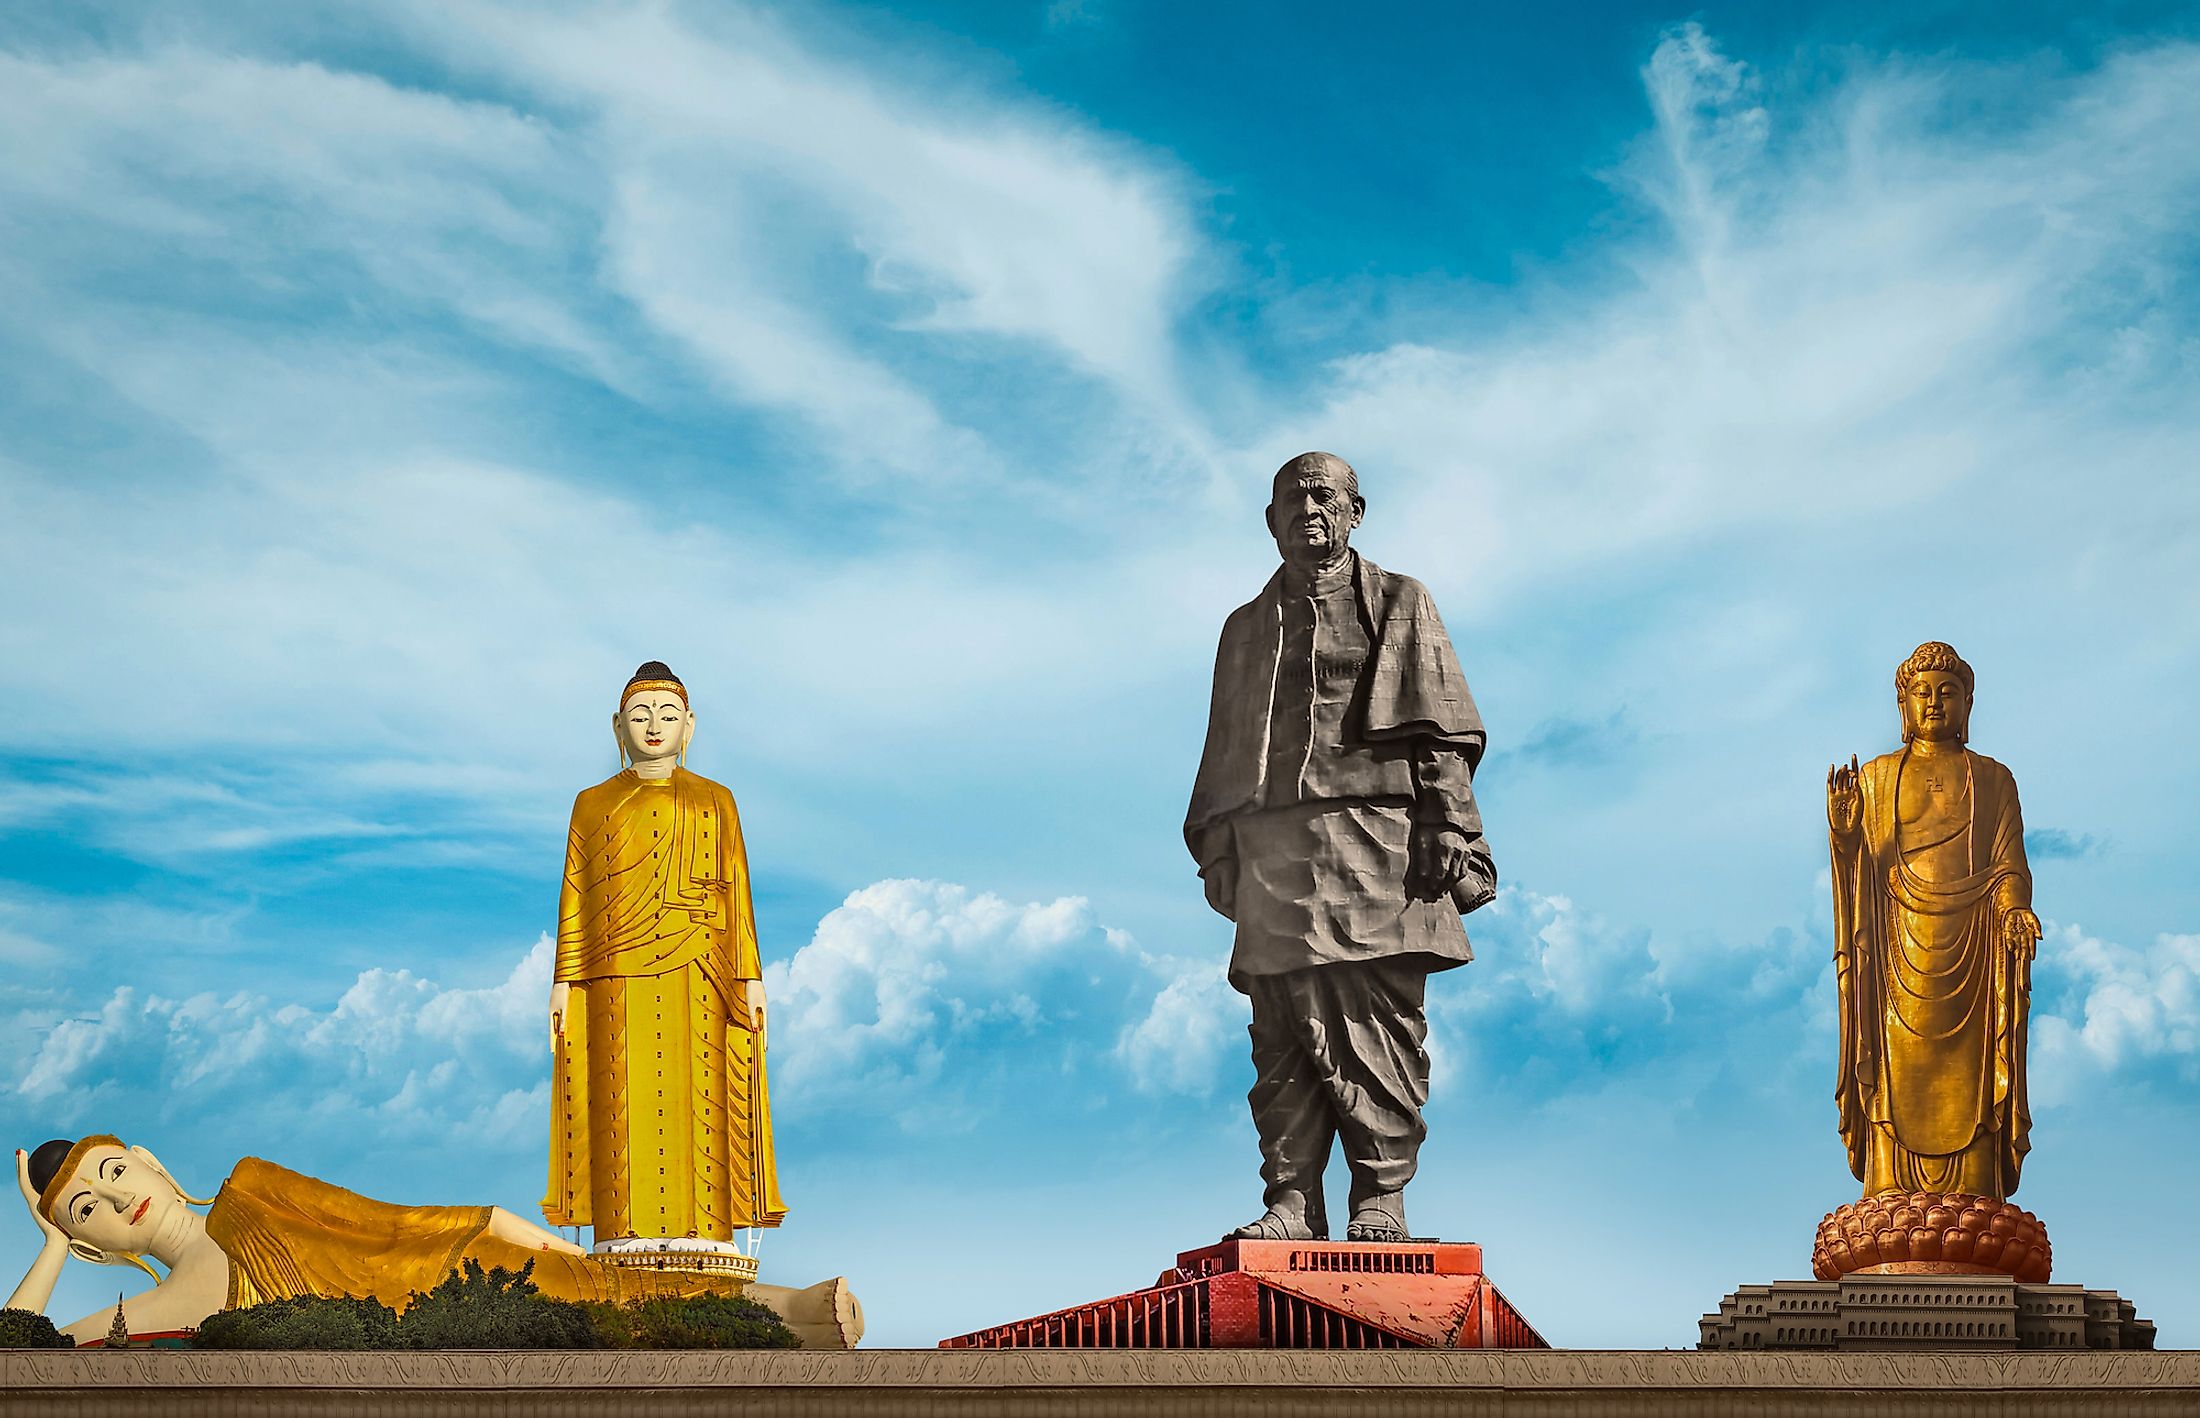 Tallest statues in the world.